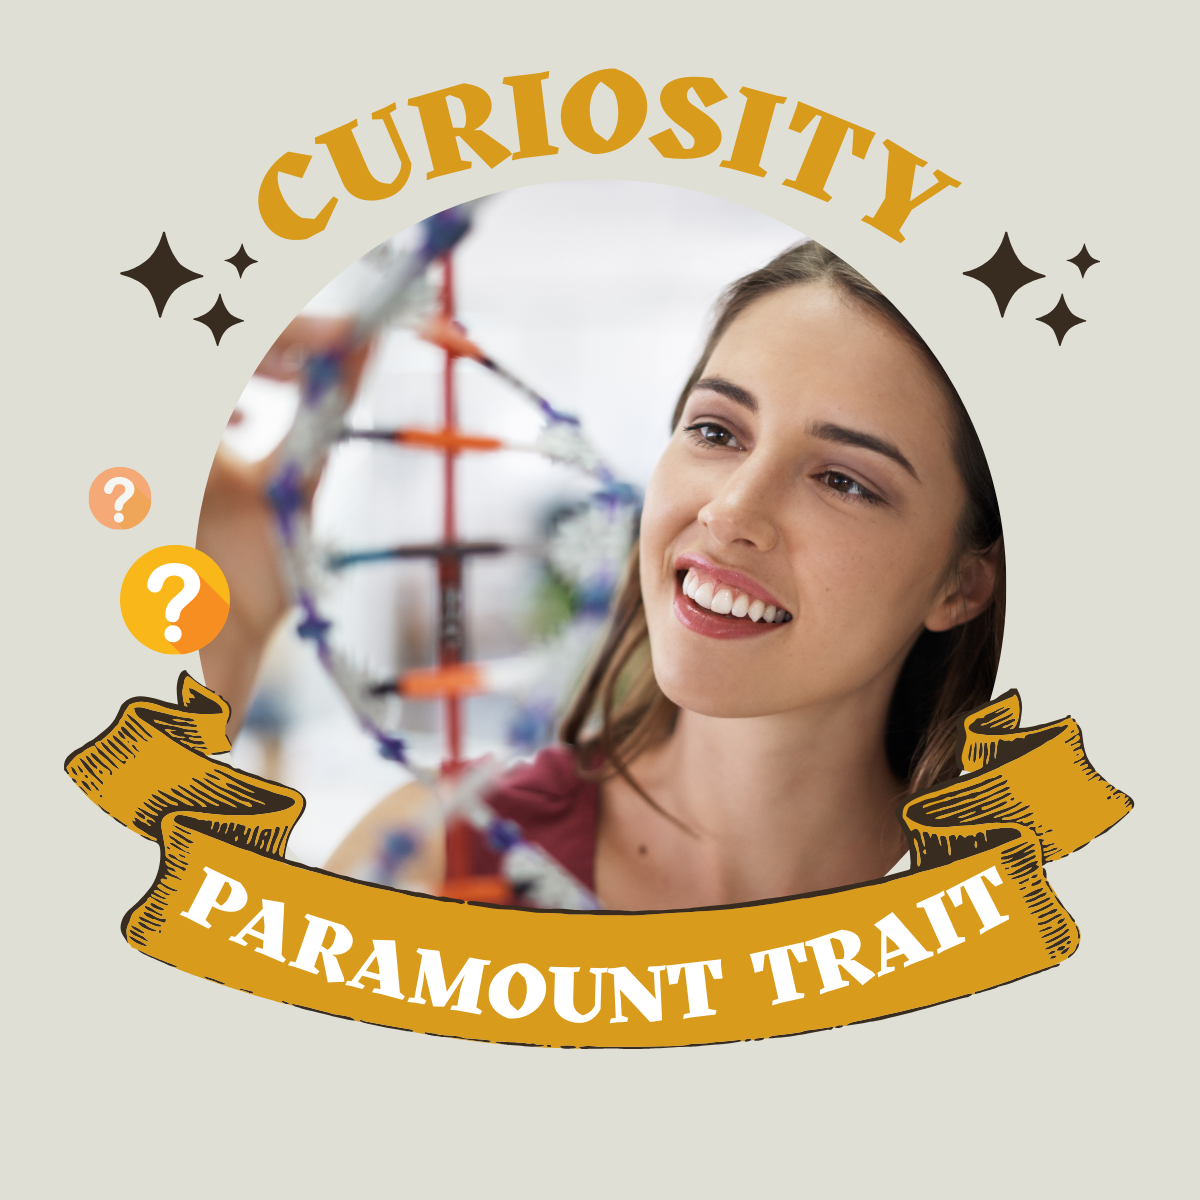 banner for curiosity as employee's top trait